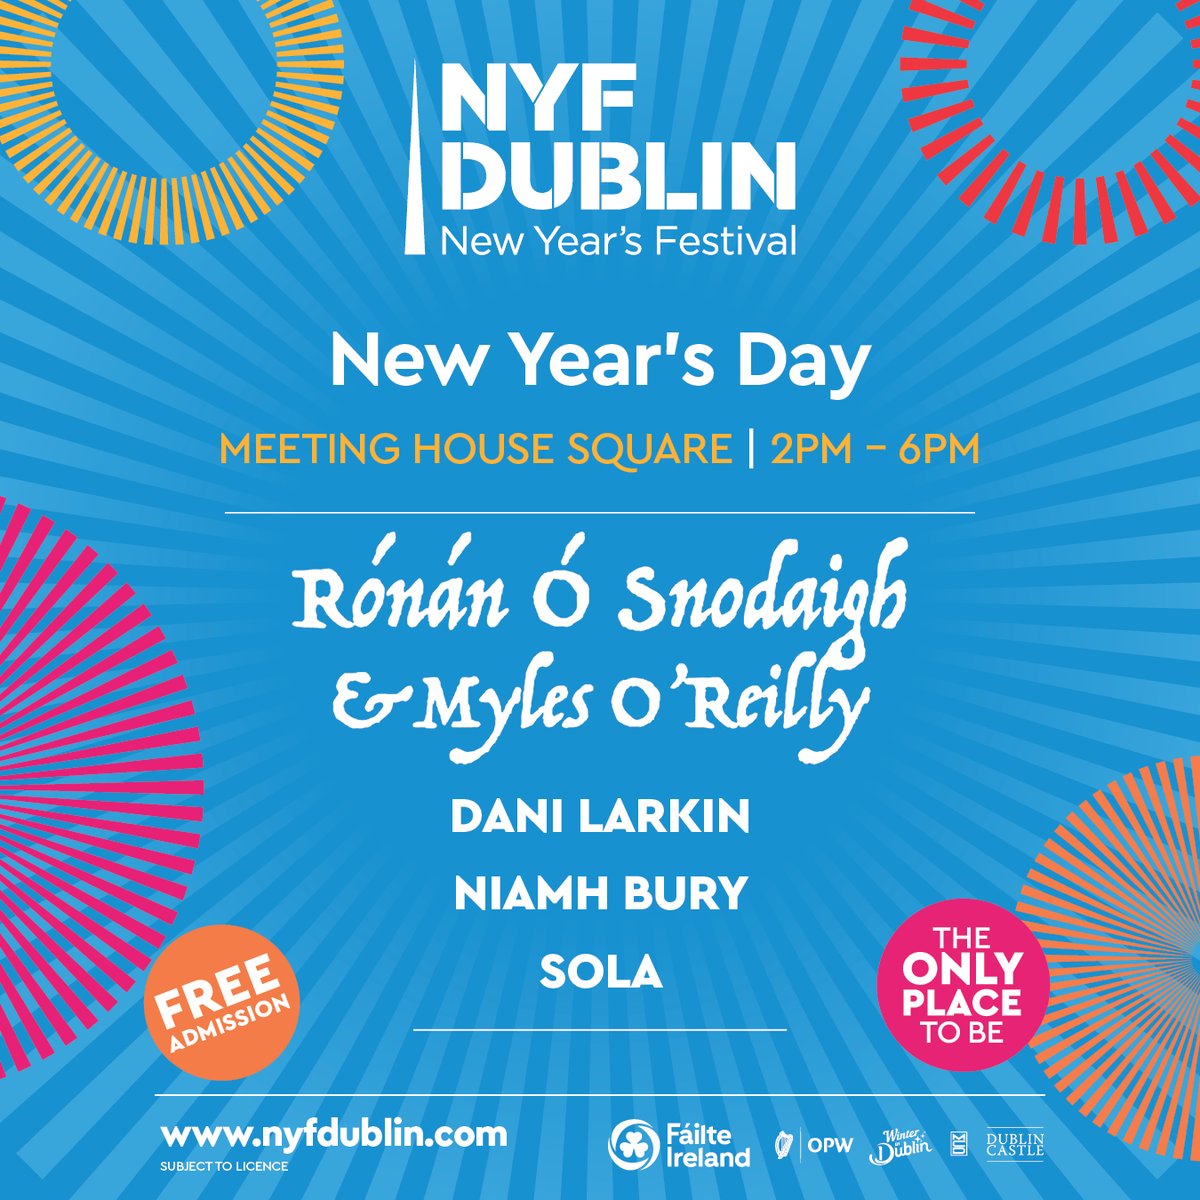 🎉 Happy New Year! ✨ Don't miss out on the last day of the festivities! 🎻   

1pm - 5pm, Dublin Castle | Free Event 

2pm - 6pm, Meeting House Square | Free Event, Family Friendly 

#TheOnlyPlaceToBe #NYFDublin